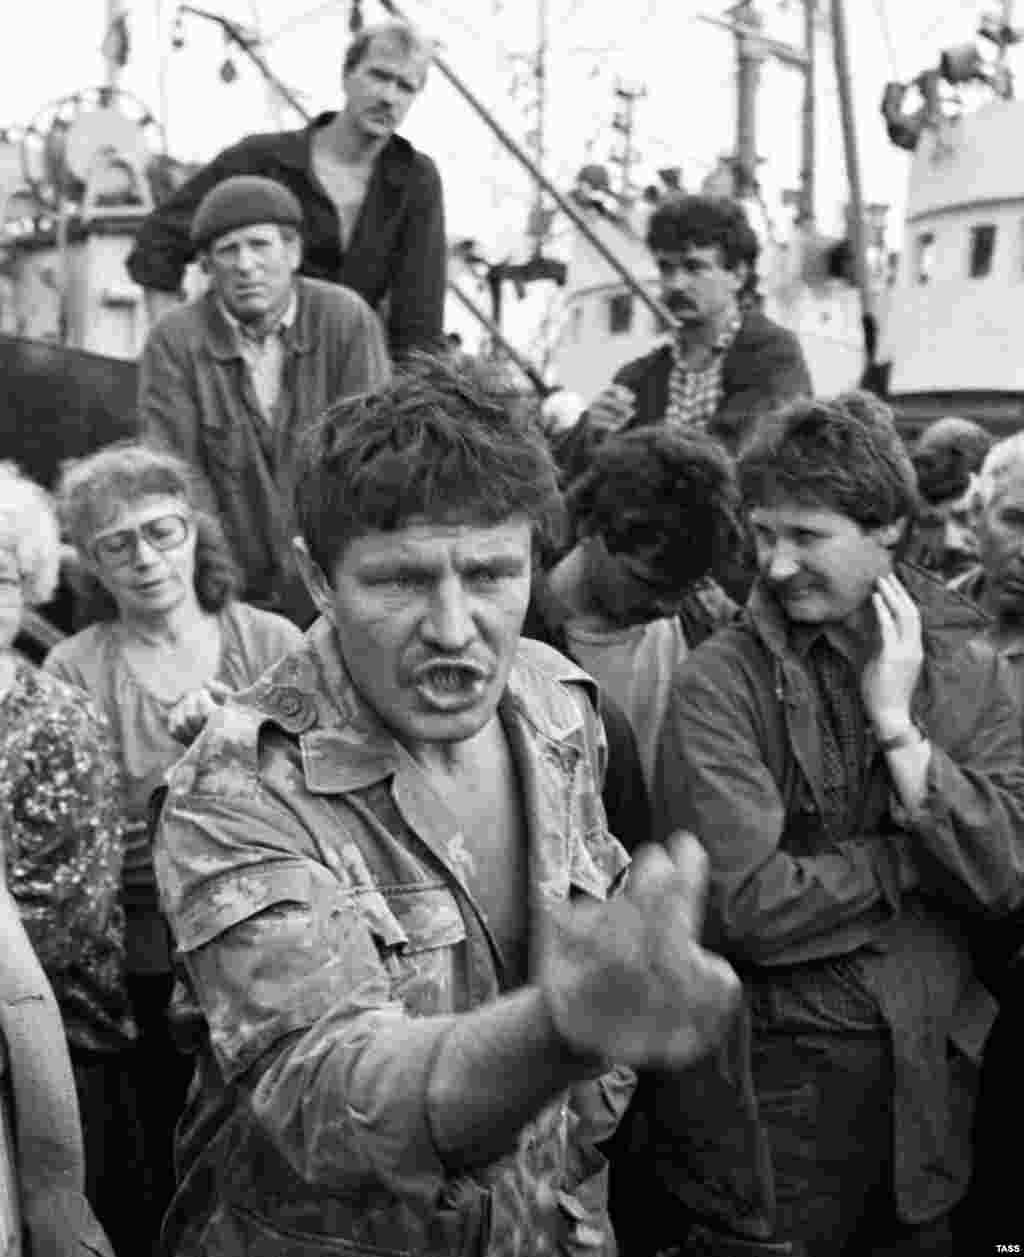 Russian fishermen at a rally defending Russia's possession of the Kuriles in the early '90s. A 2016 poll showed 78 percent of Russian mainlanders were opposed to returning the disputed islands to Japan.